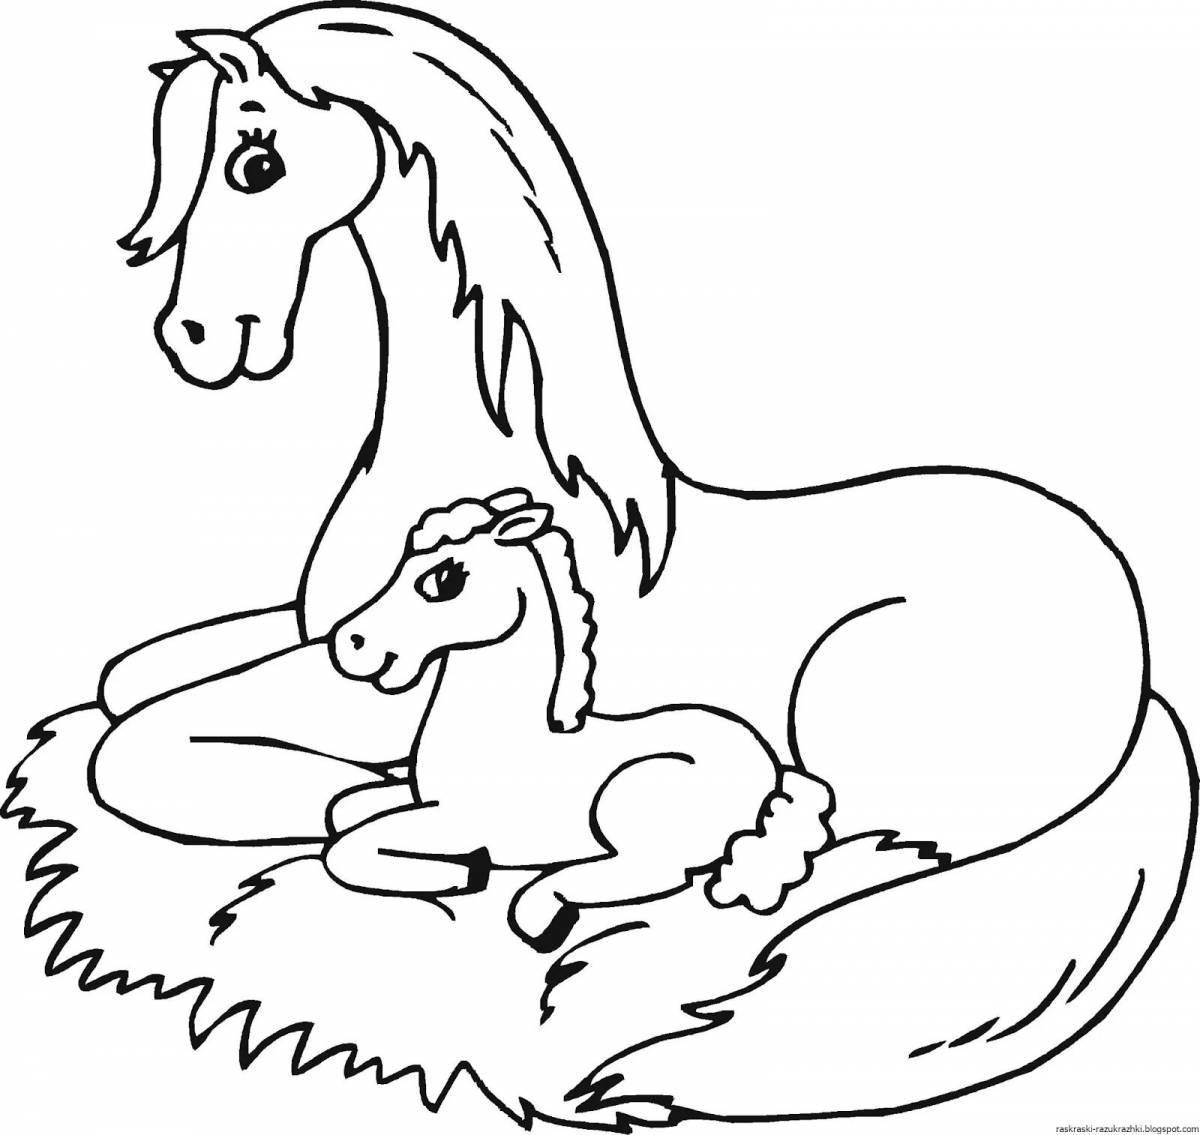 Colouring peaceful foal for children